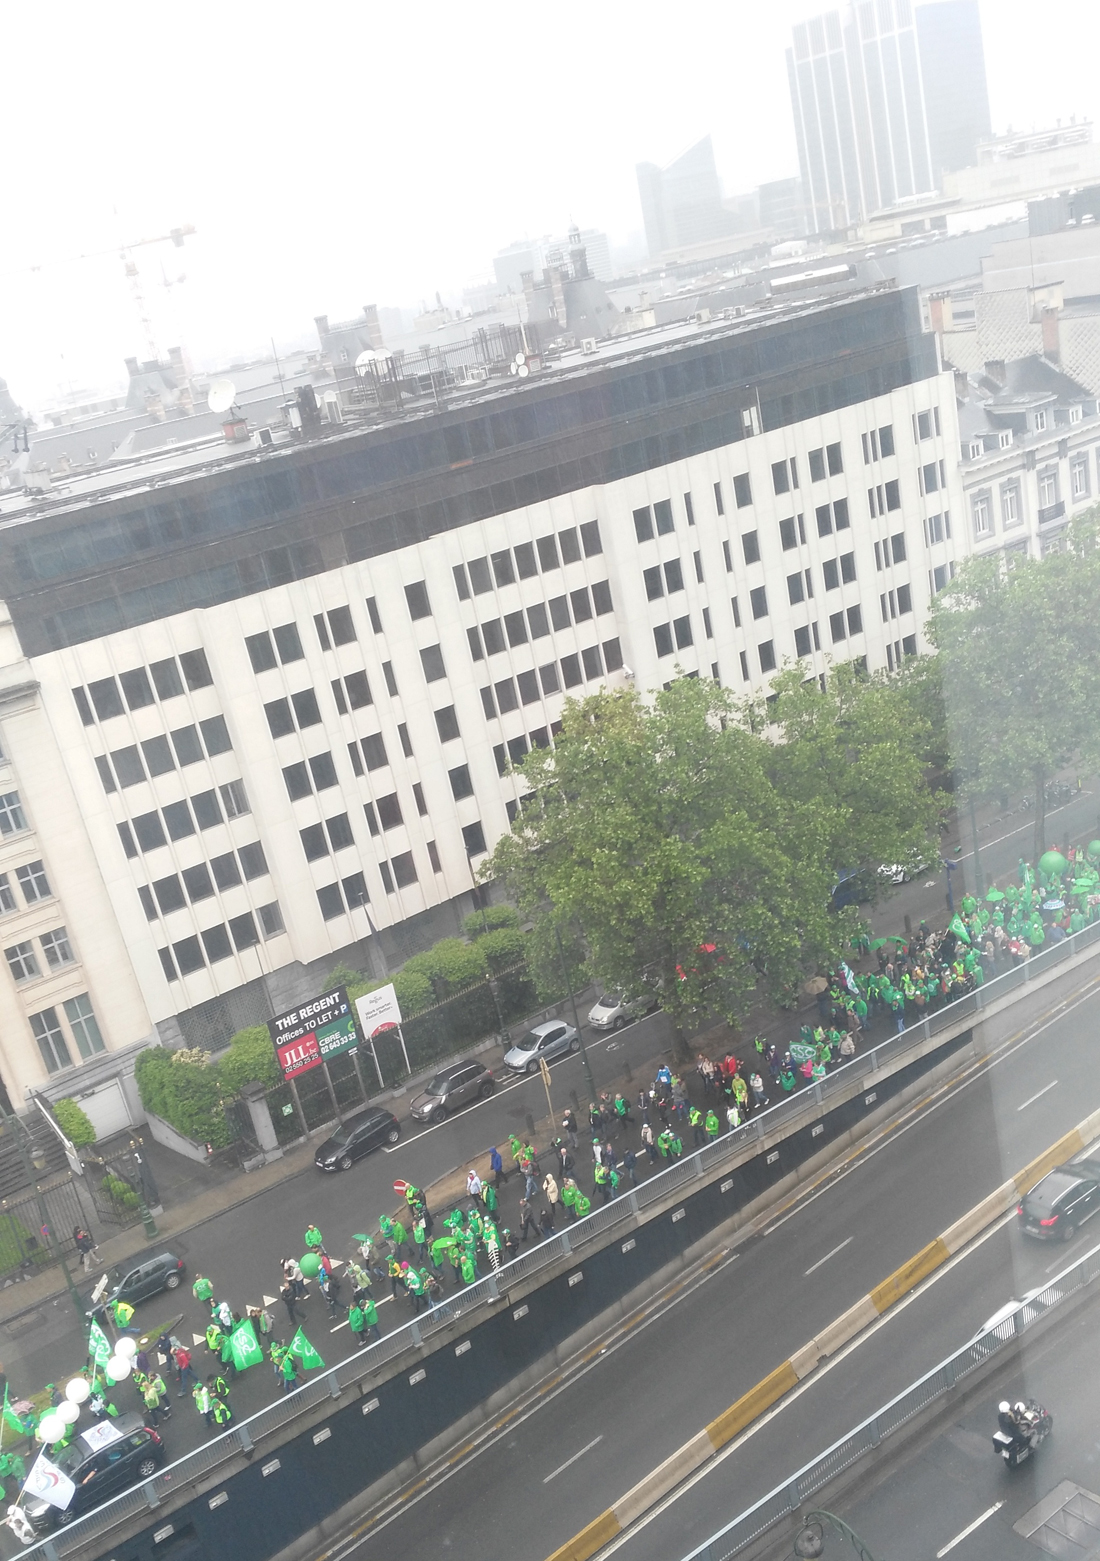 Workers Demonstration in Brussels